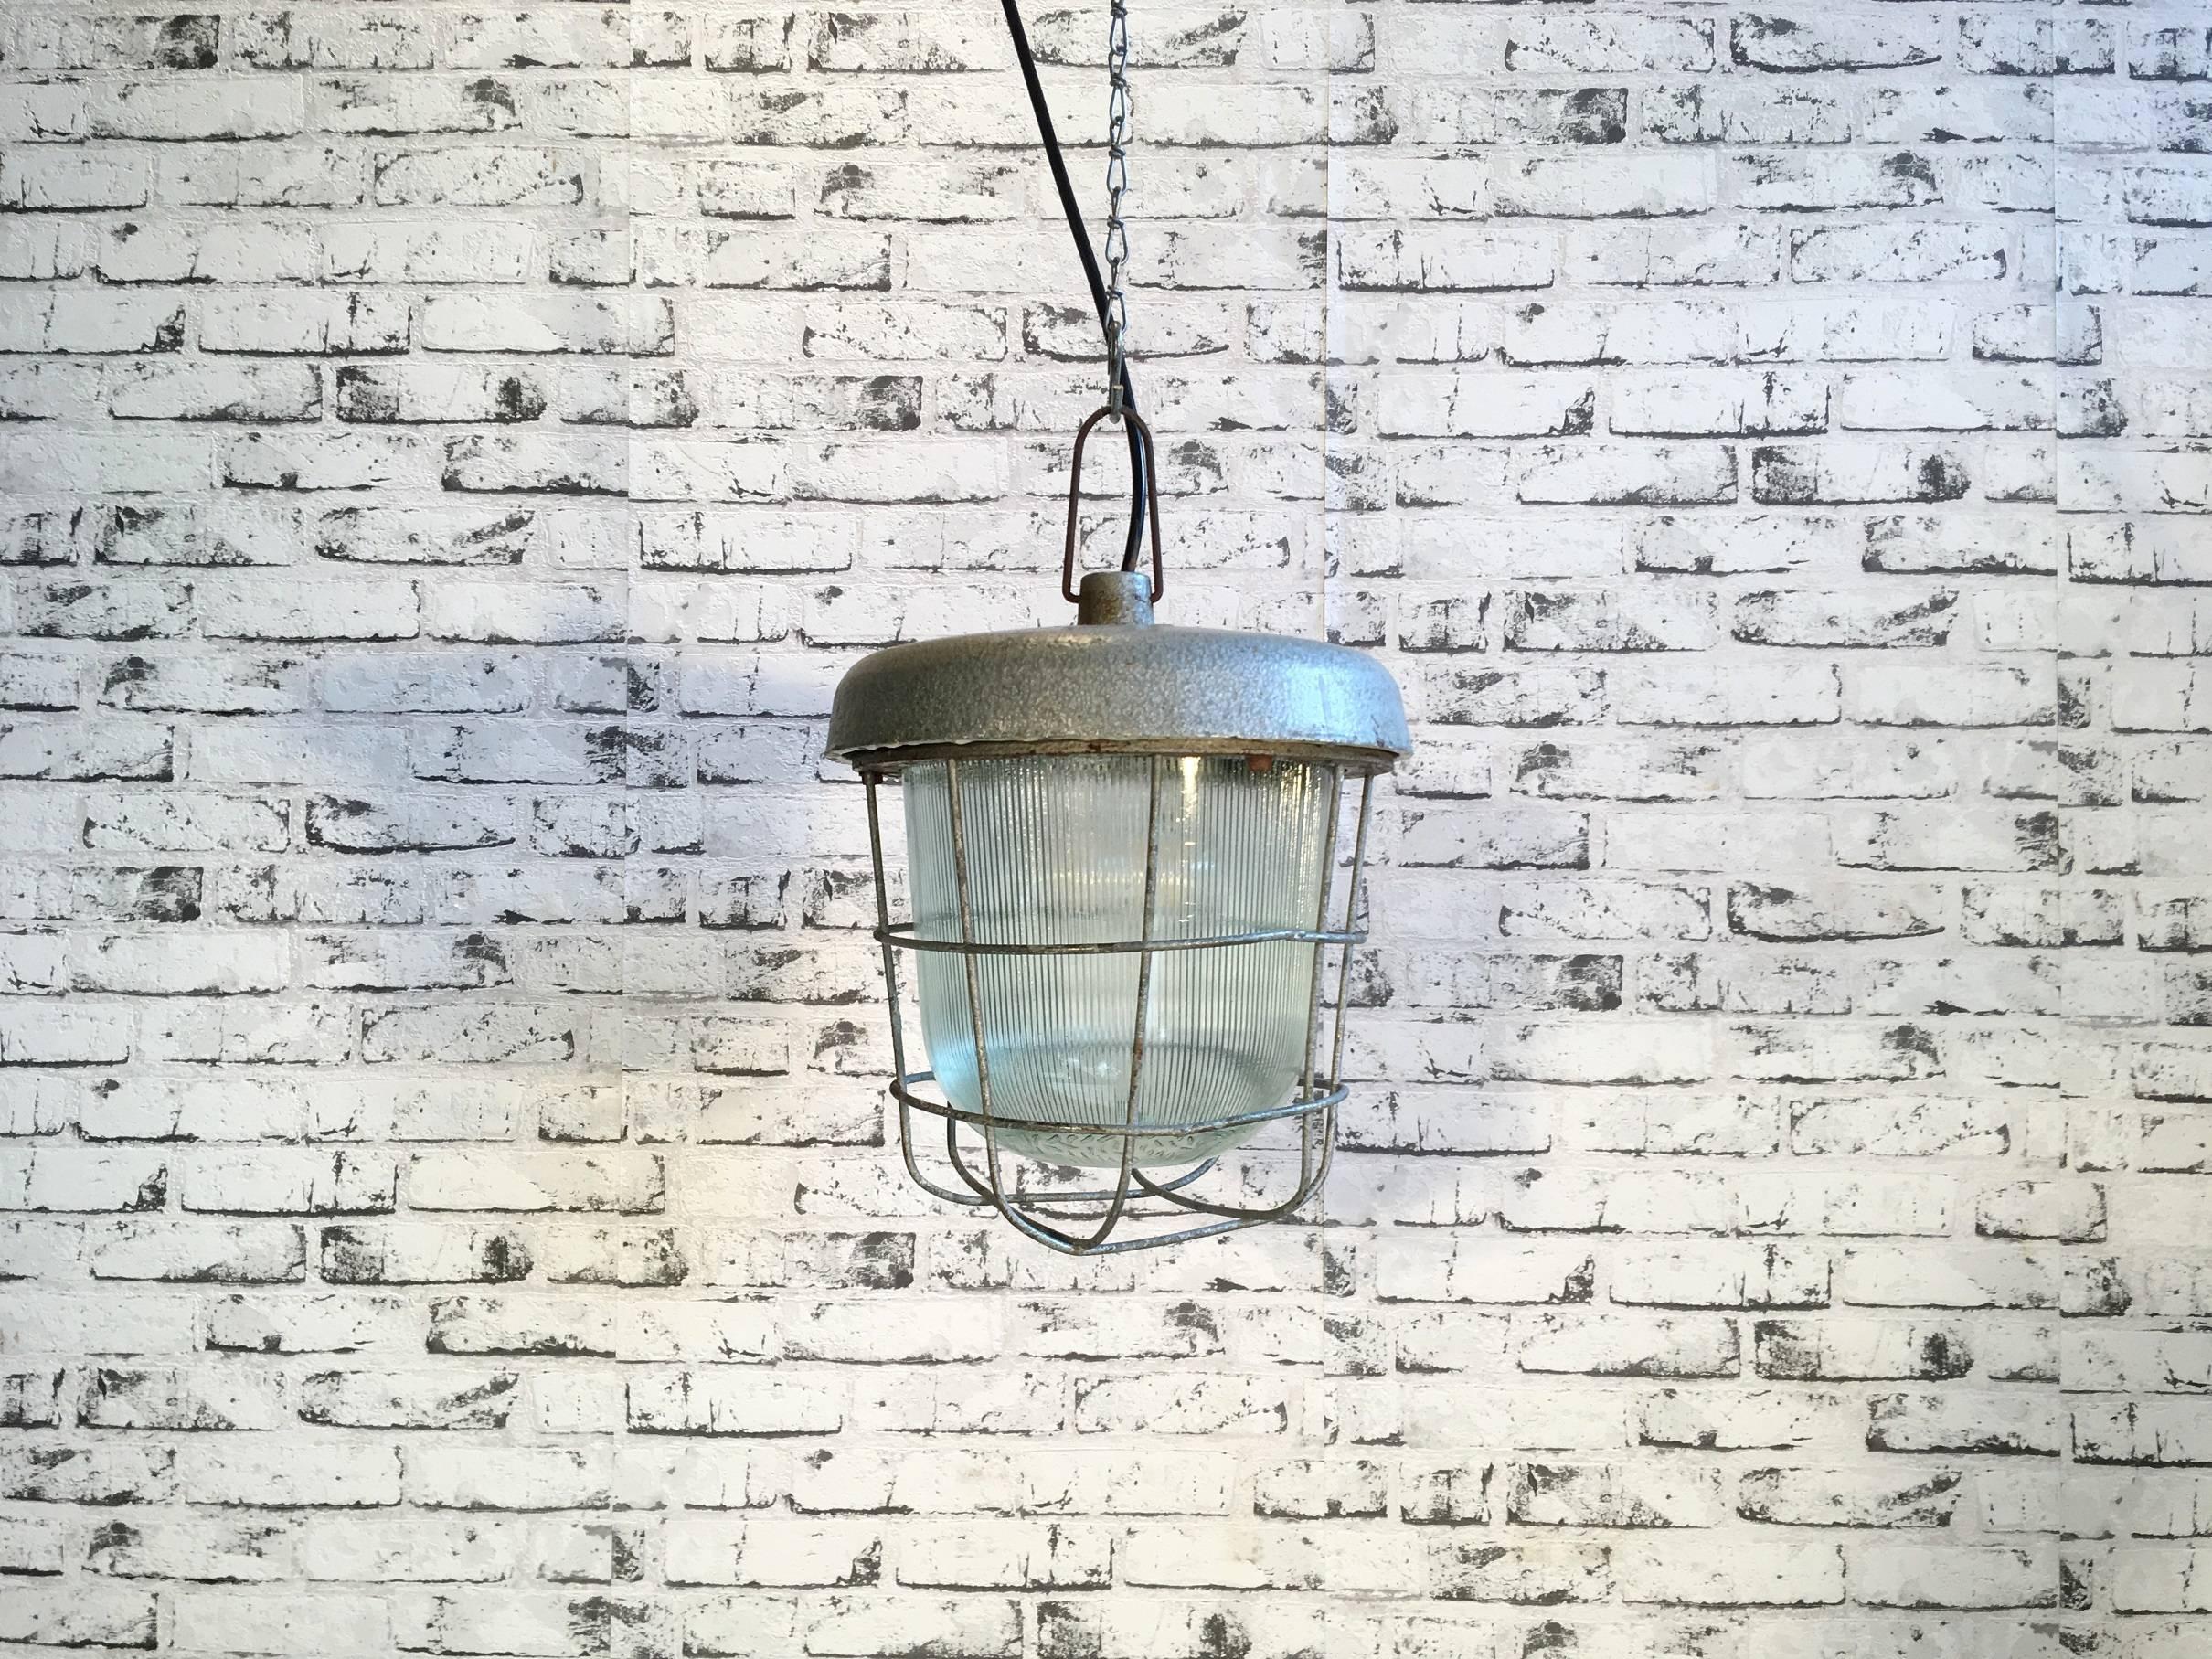 This vintage factory industrial hanging lamp was designed in the 1960s in Poland. It is made from cast iron and striped glass.
New socket E 27 and wire. Very good vintage condition. Weight: 7 kg.